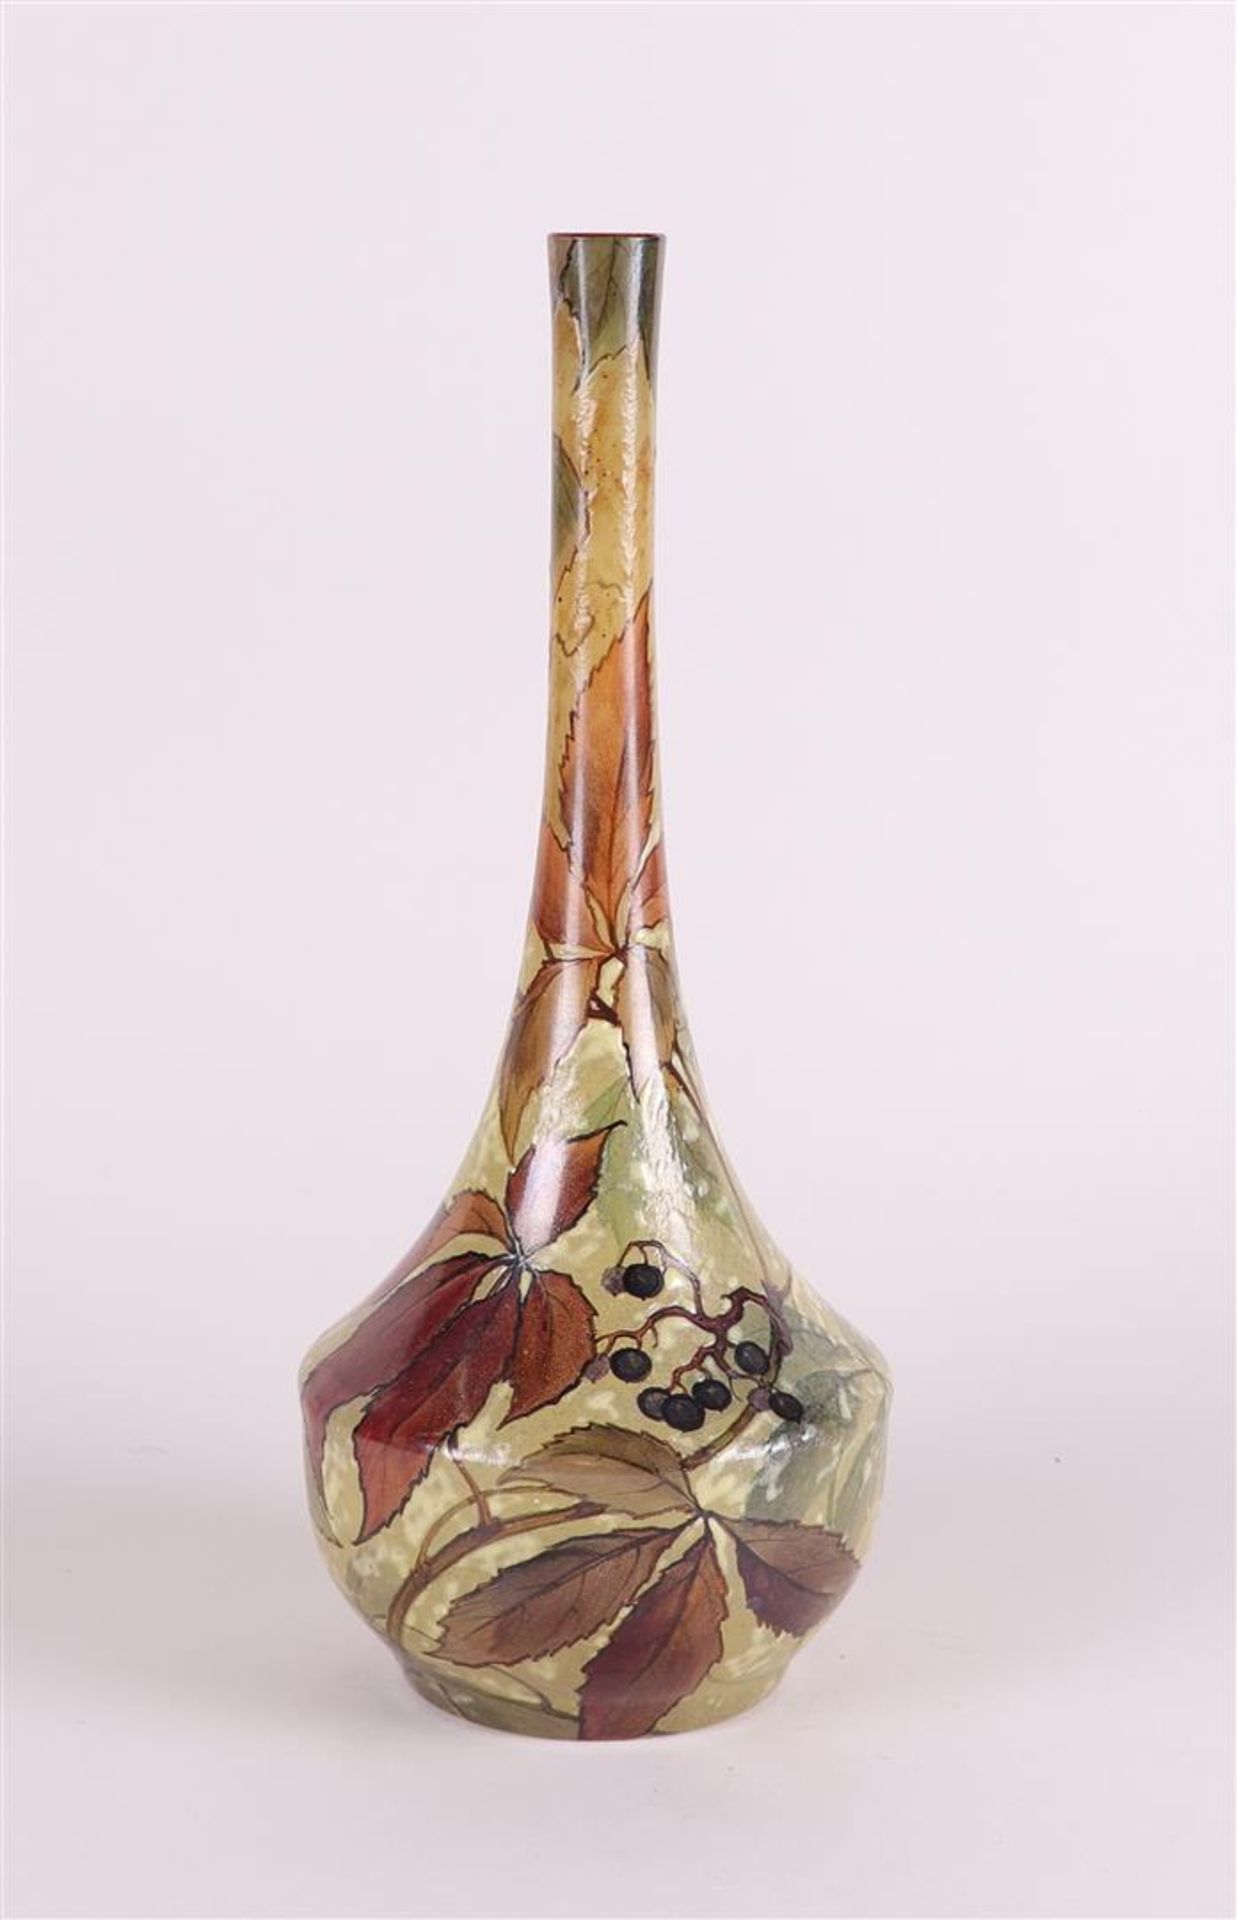 François-Théodore Legras (1839-1916) - A glass hand-painted Legras vase, marked at the foot.